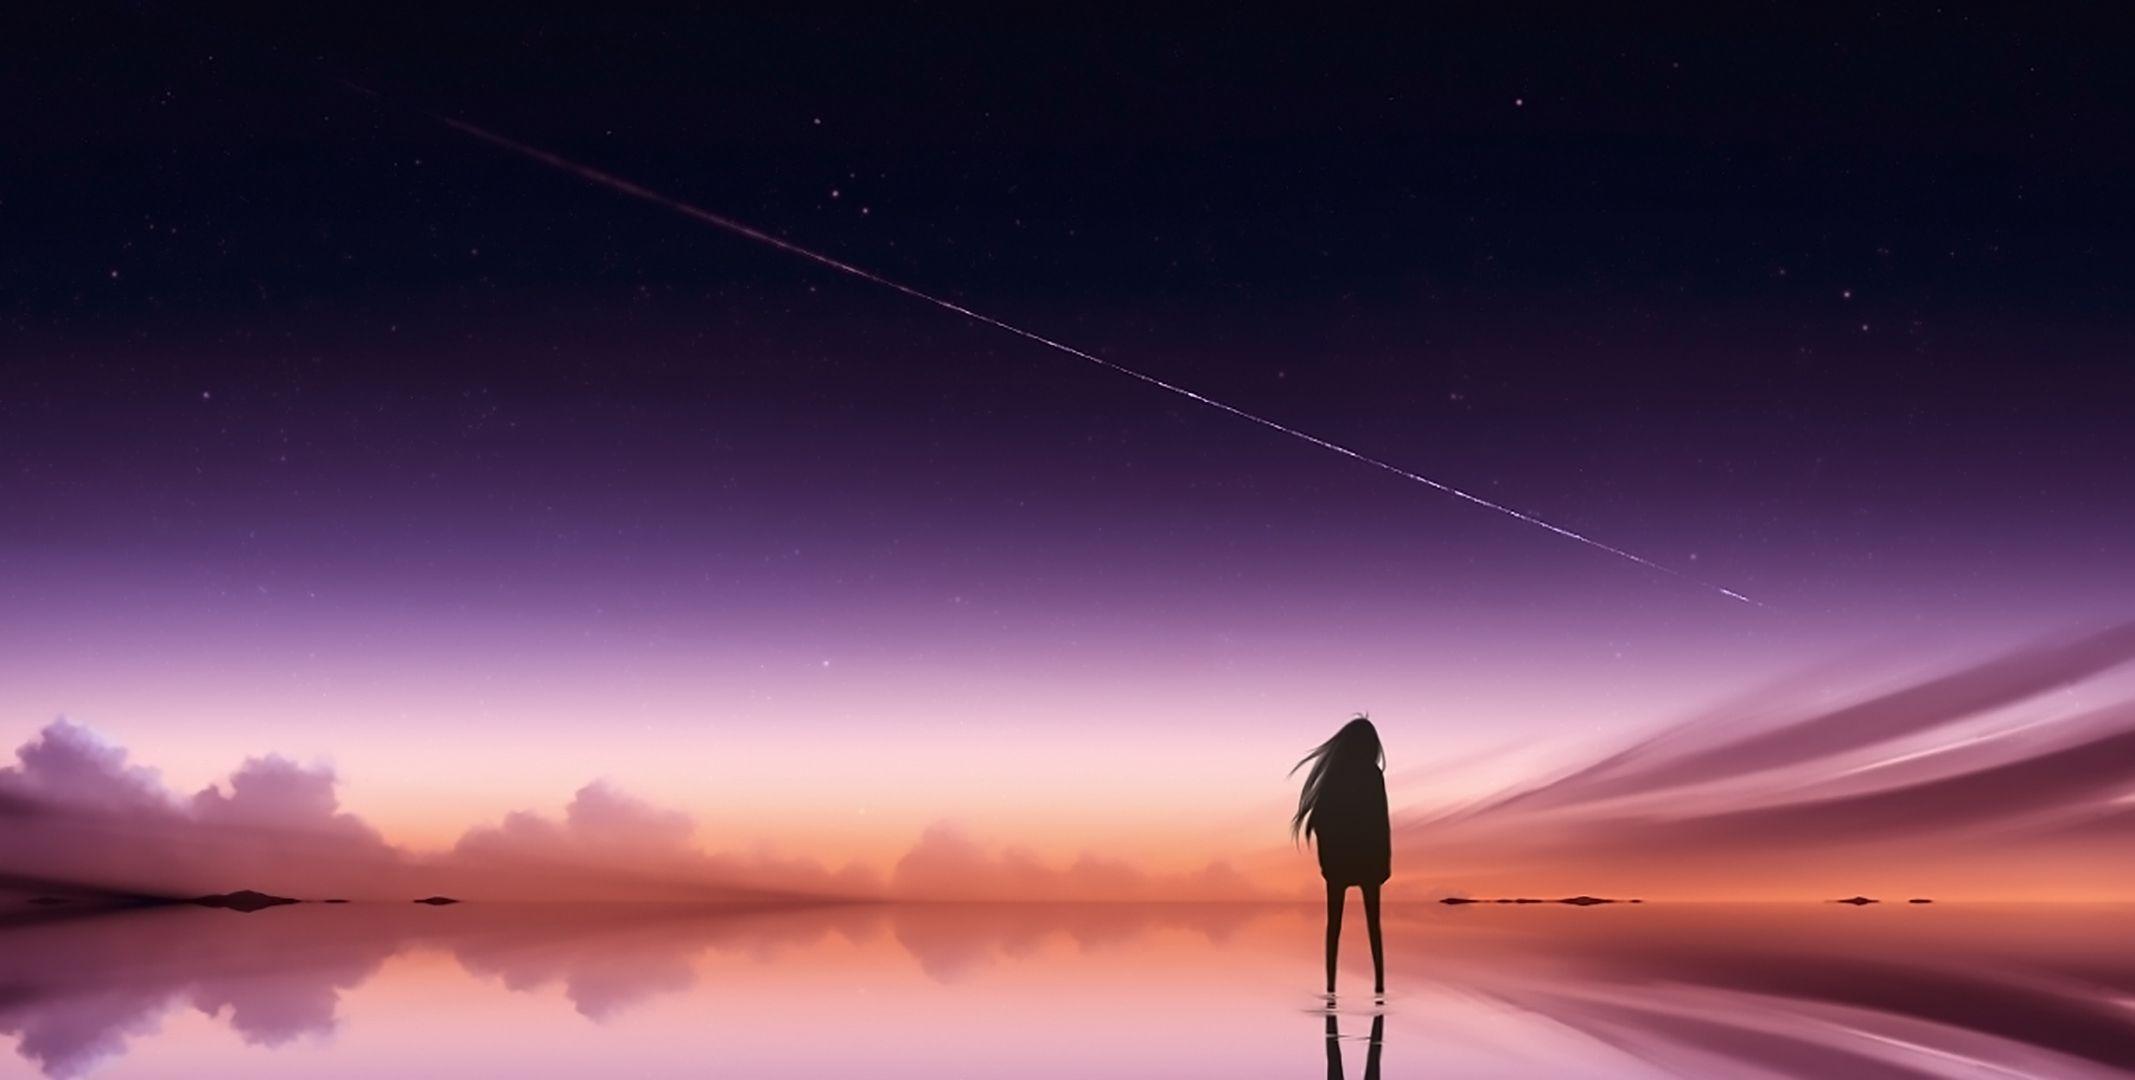 Alone Anime Wallpaper Free Alone Anime Background